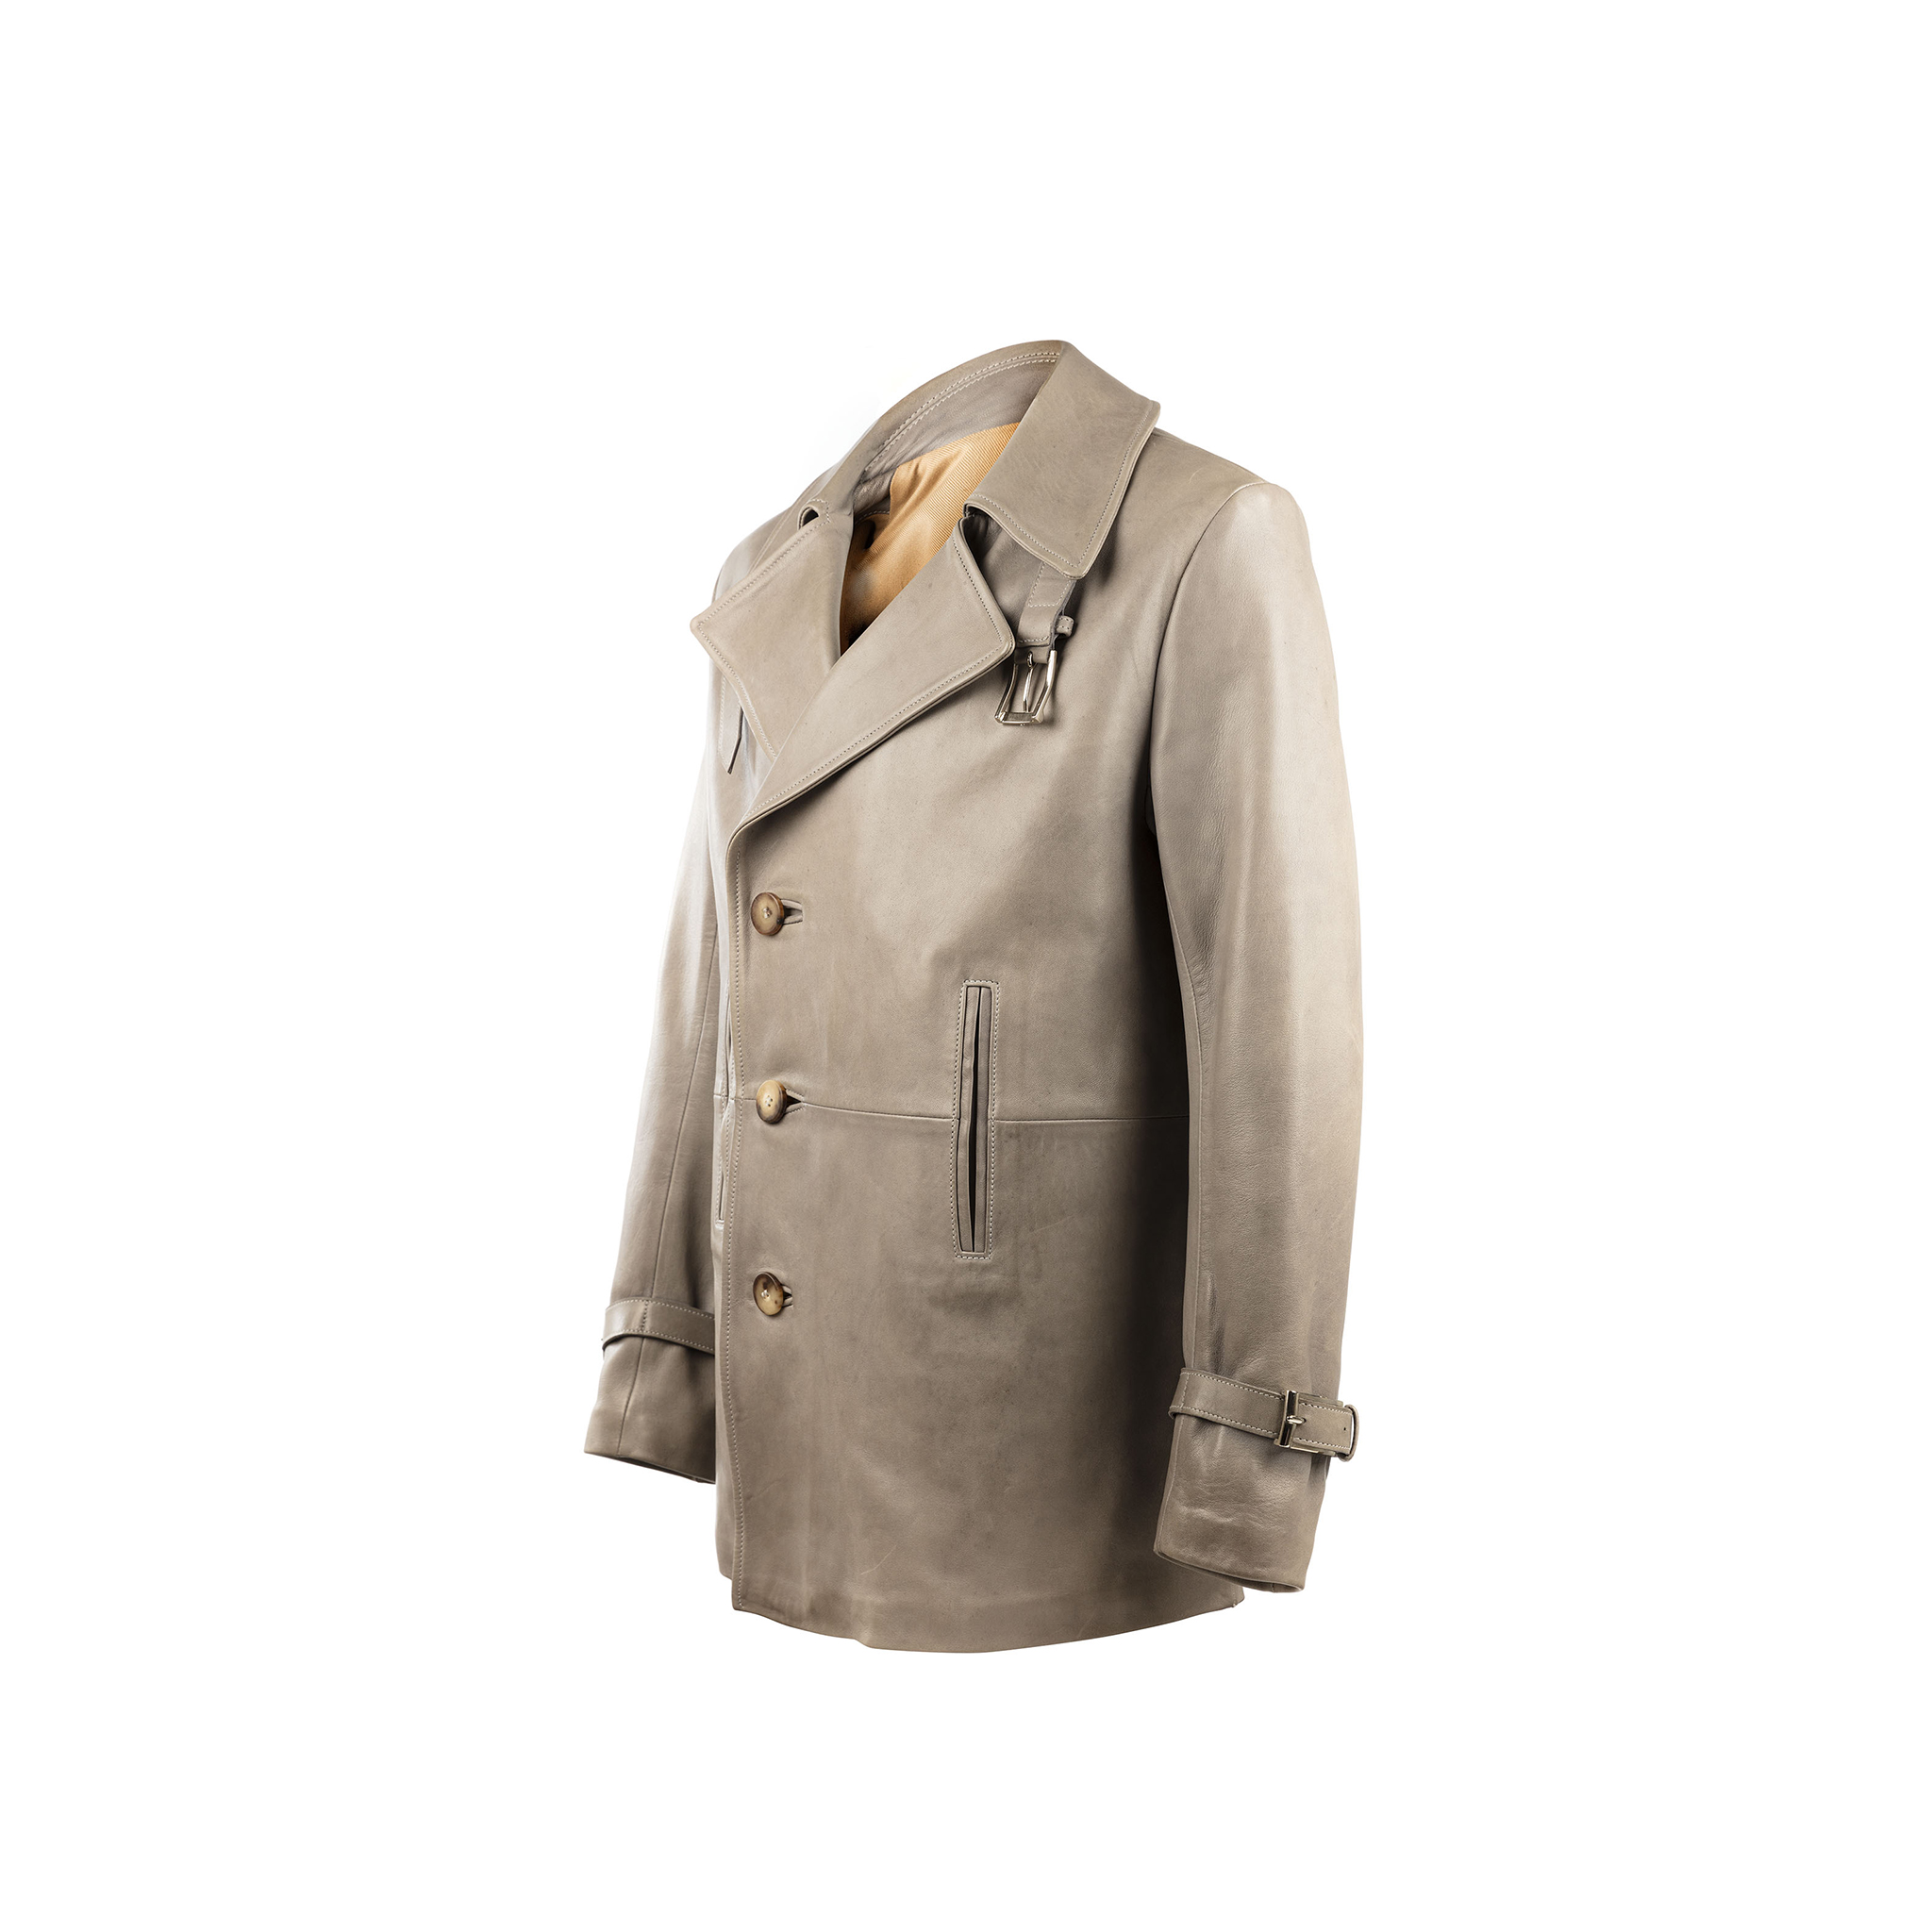 Peacoat 3/4 Jacket - Glossy leather - Grey color